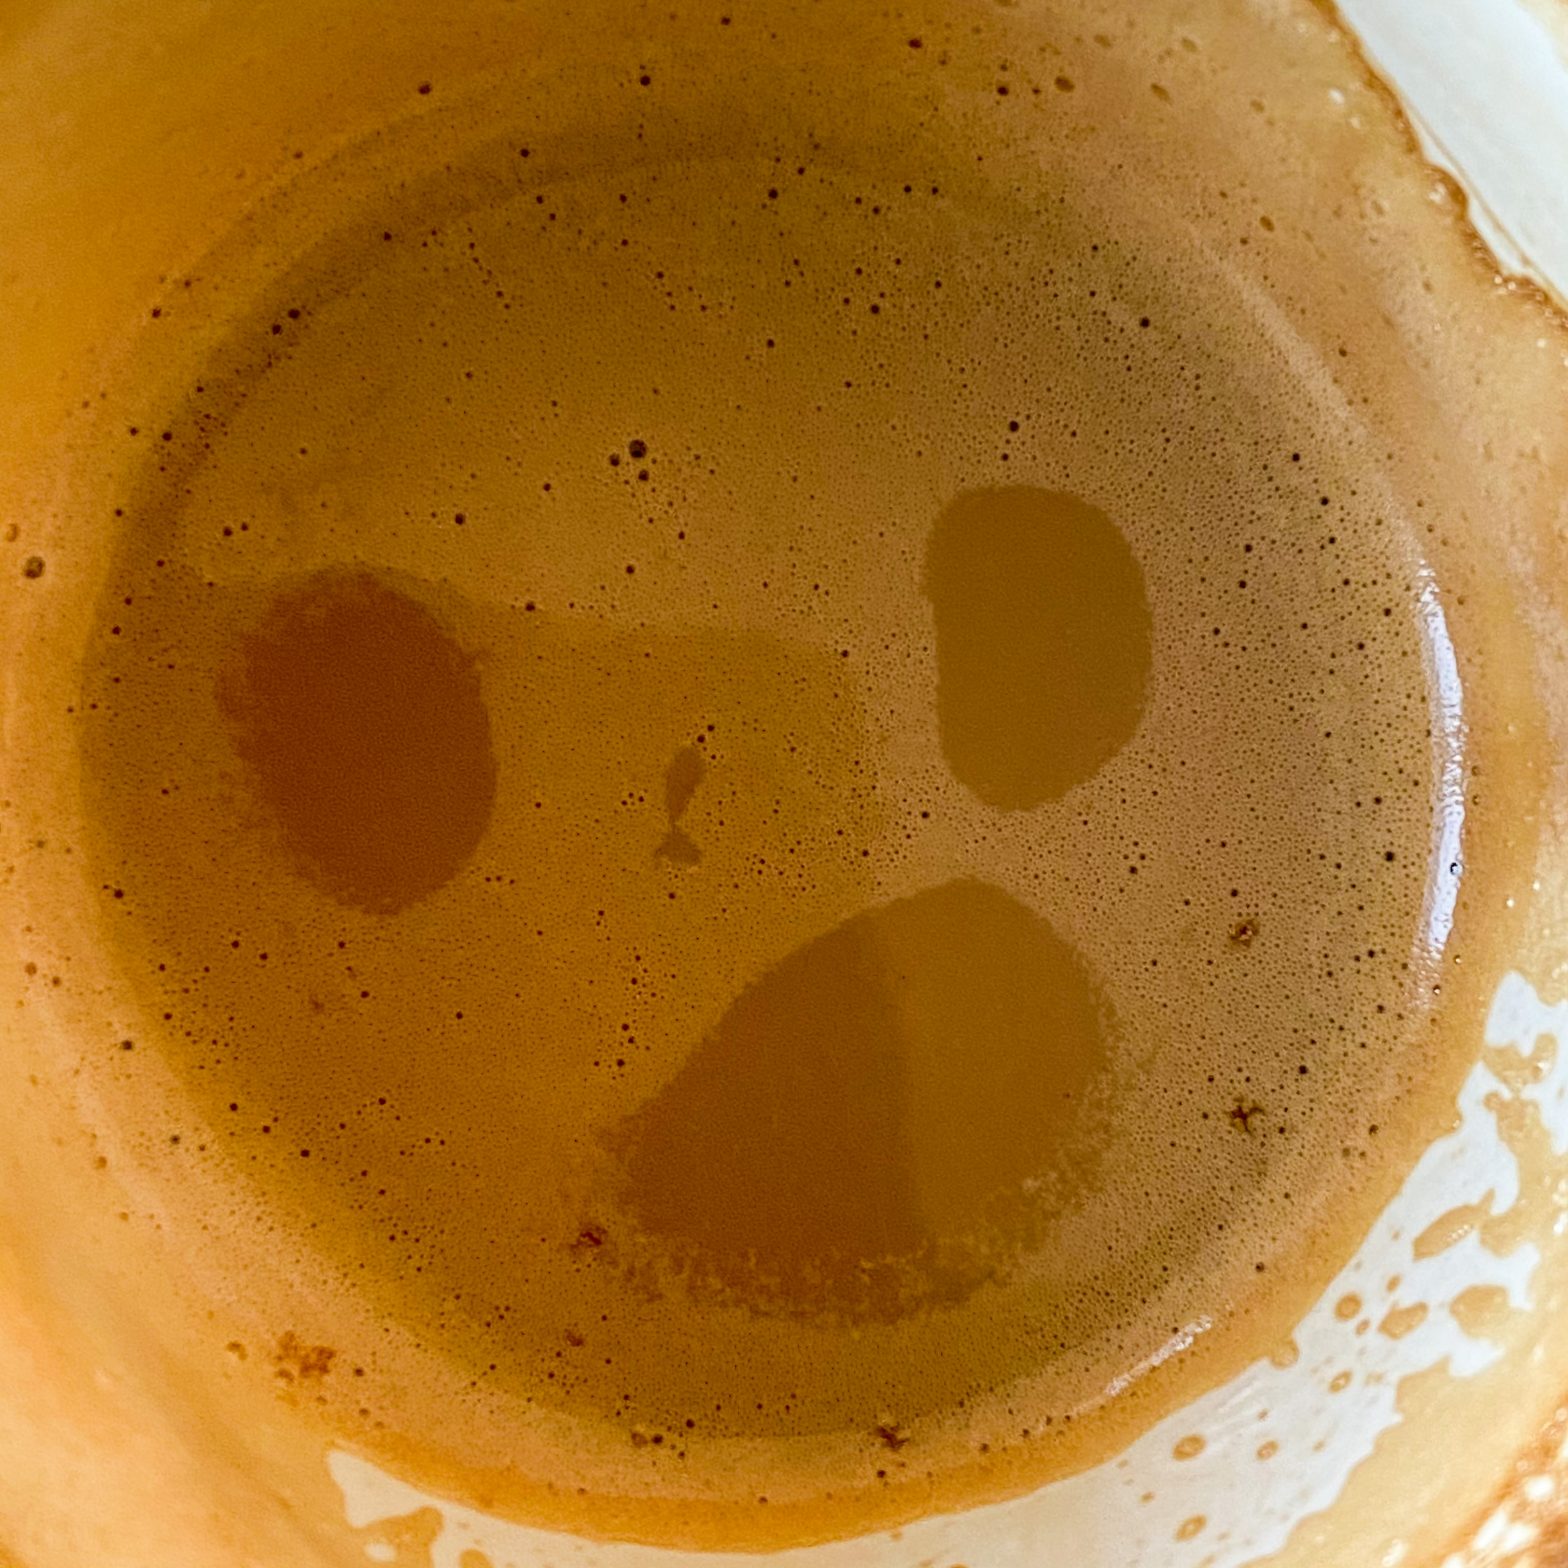 My coffee has a message for me!